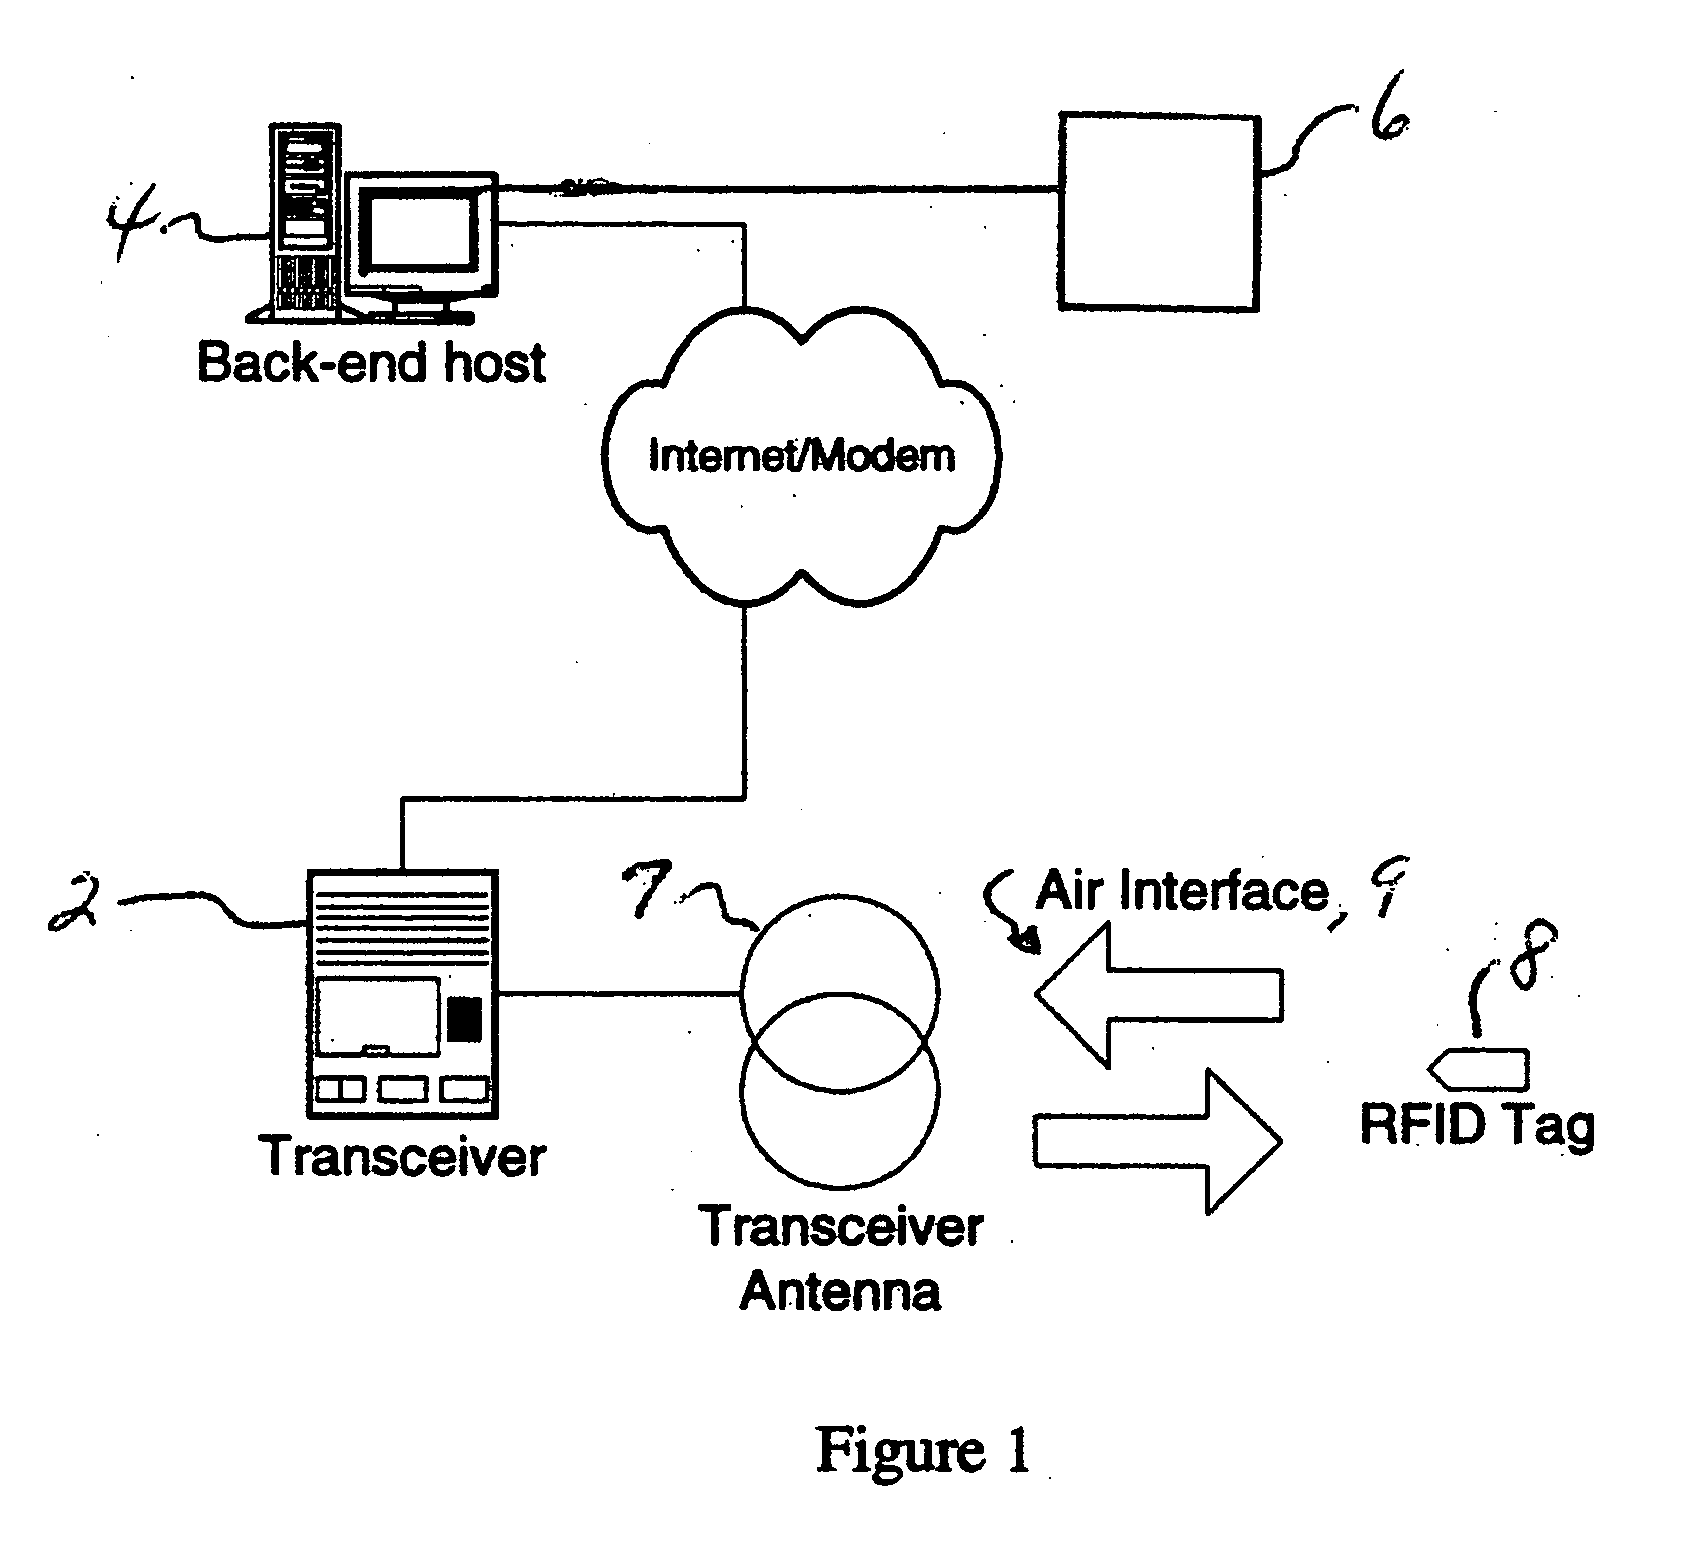 RFID device tracking and information gathering